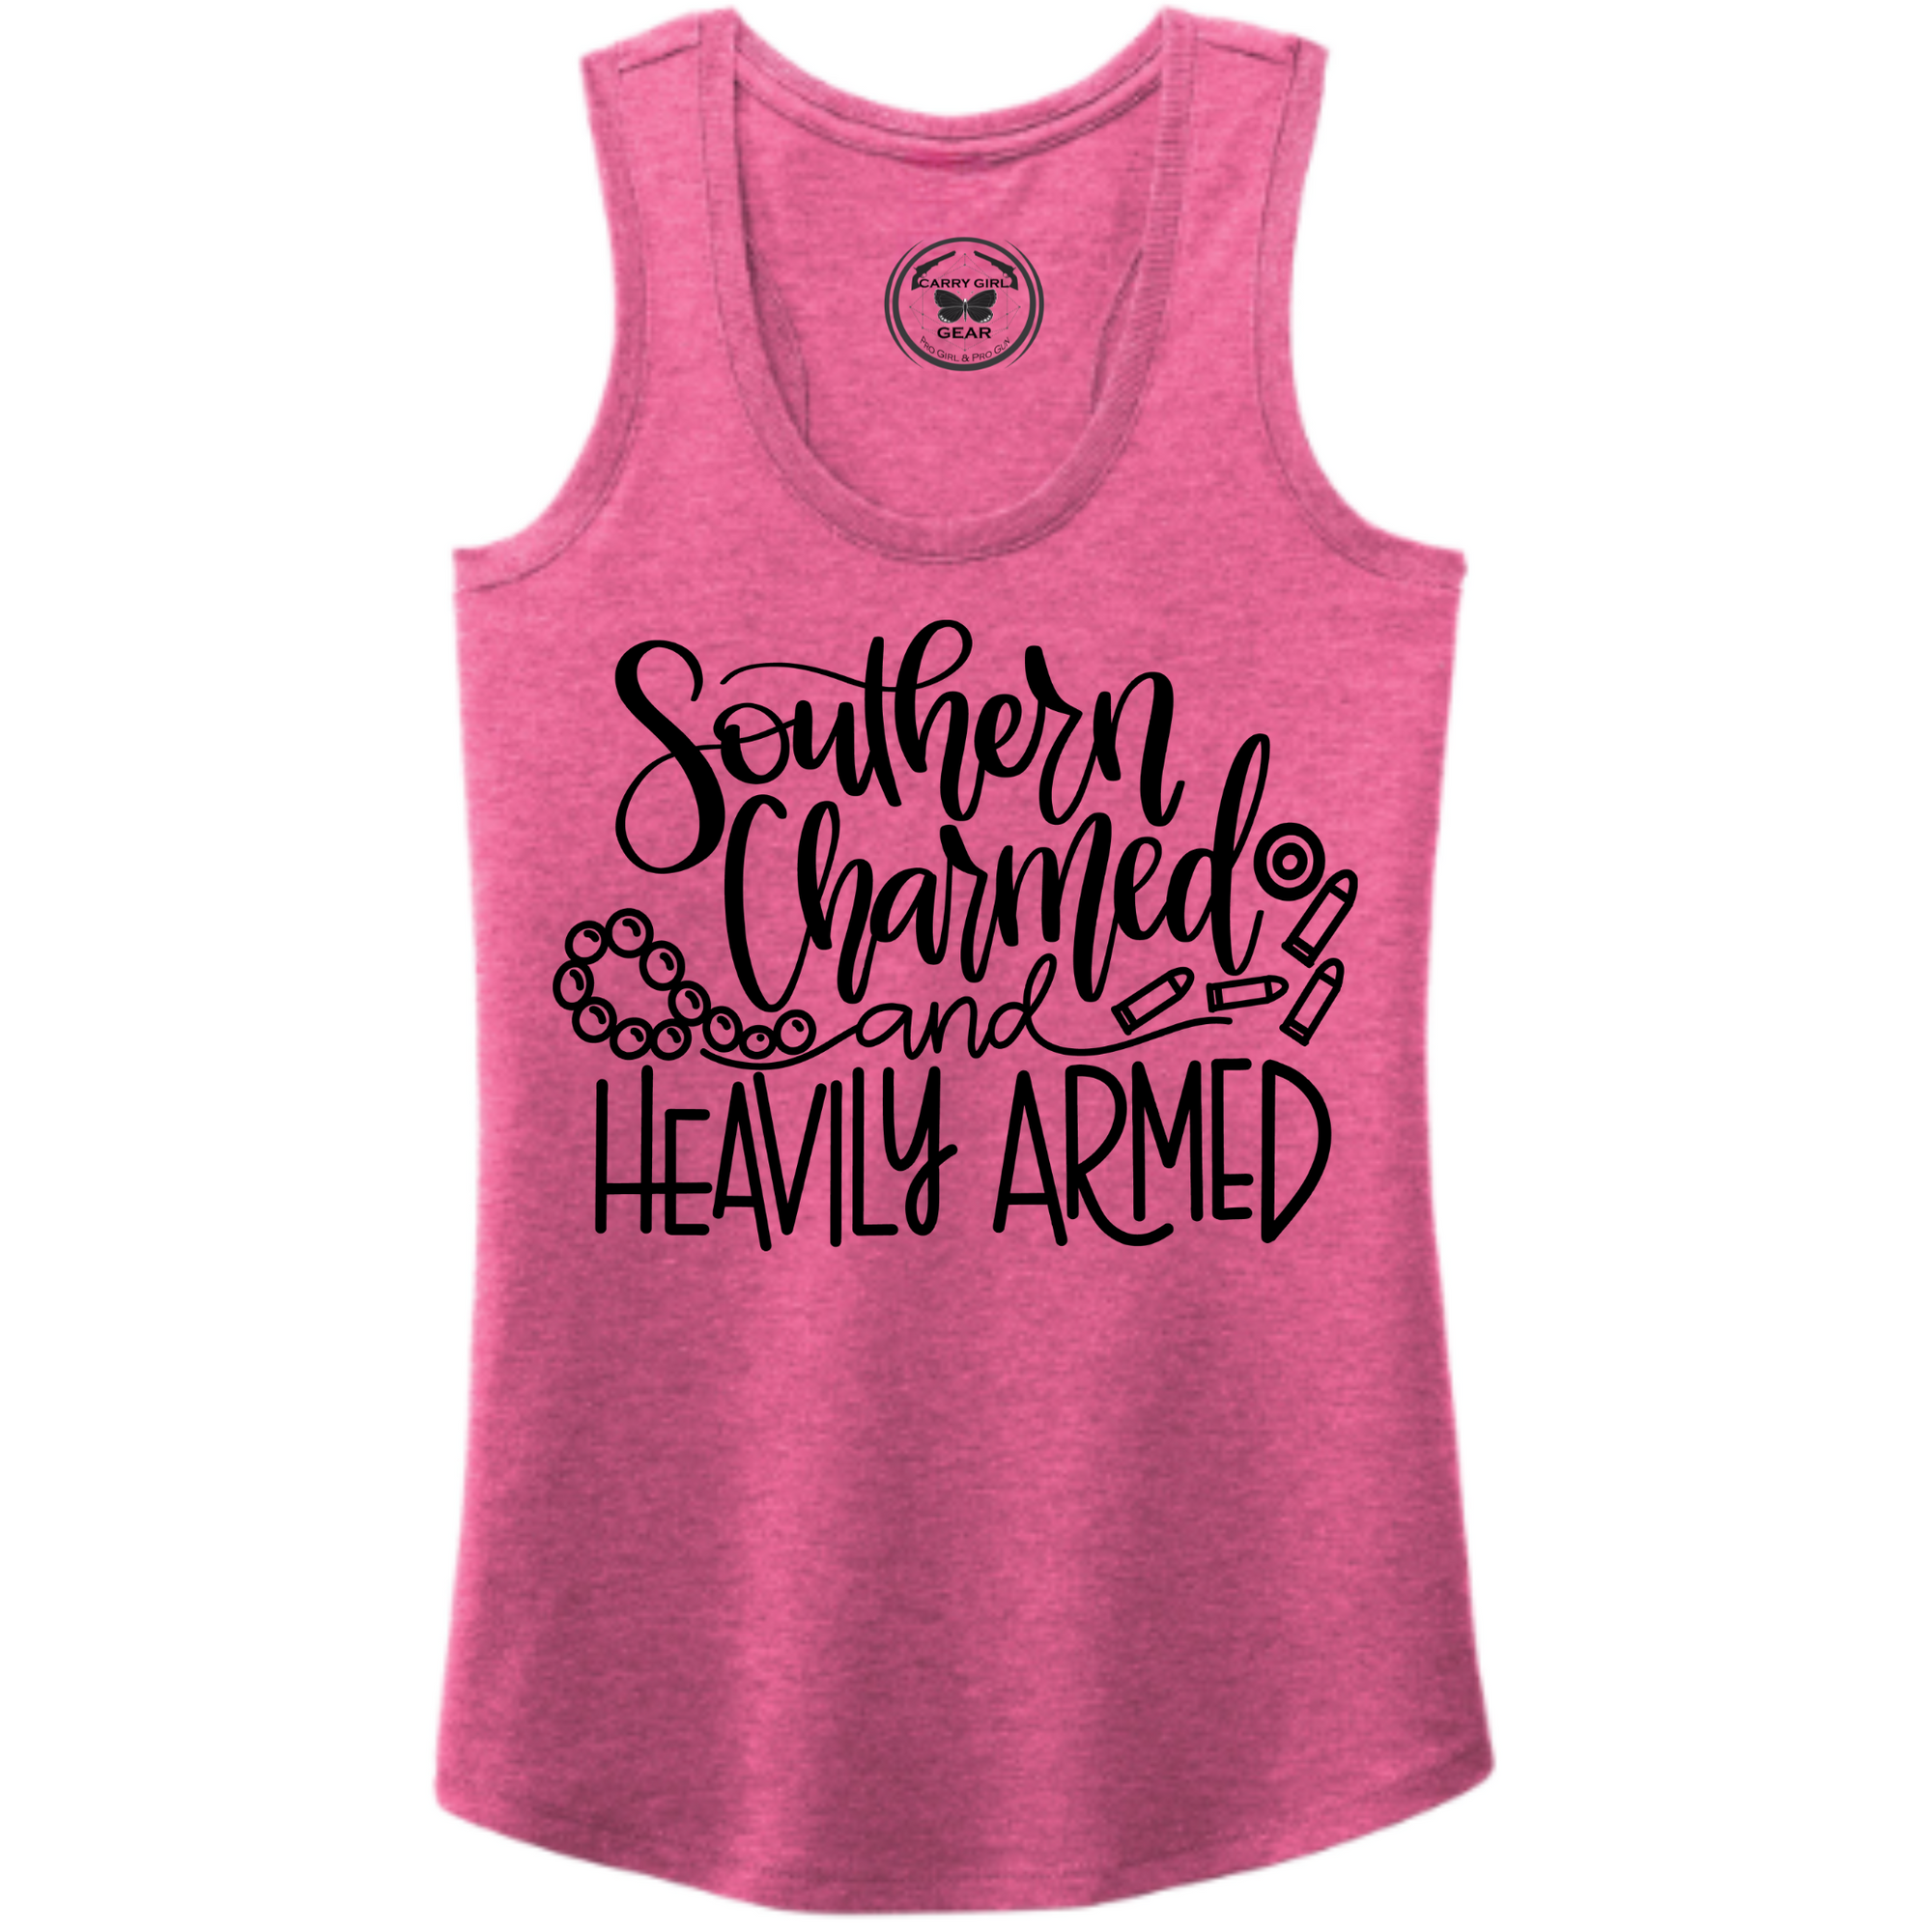 SOUTHERN CHARMED TANK TOP